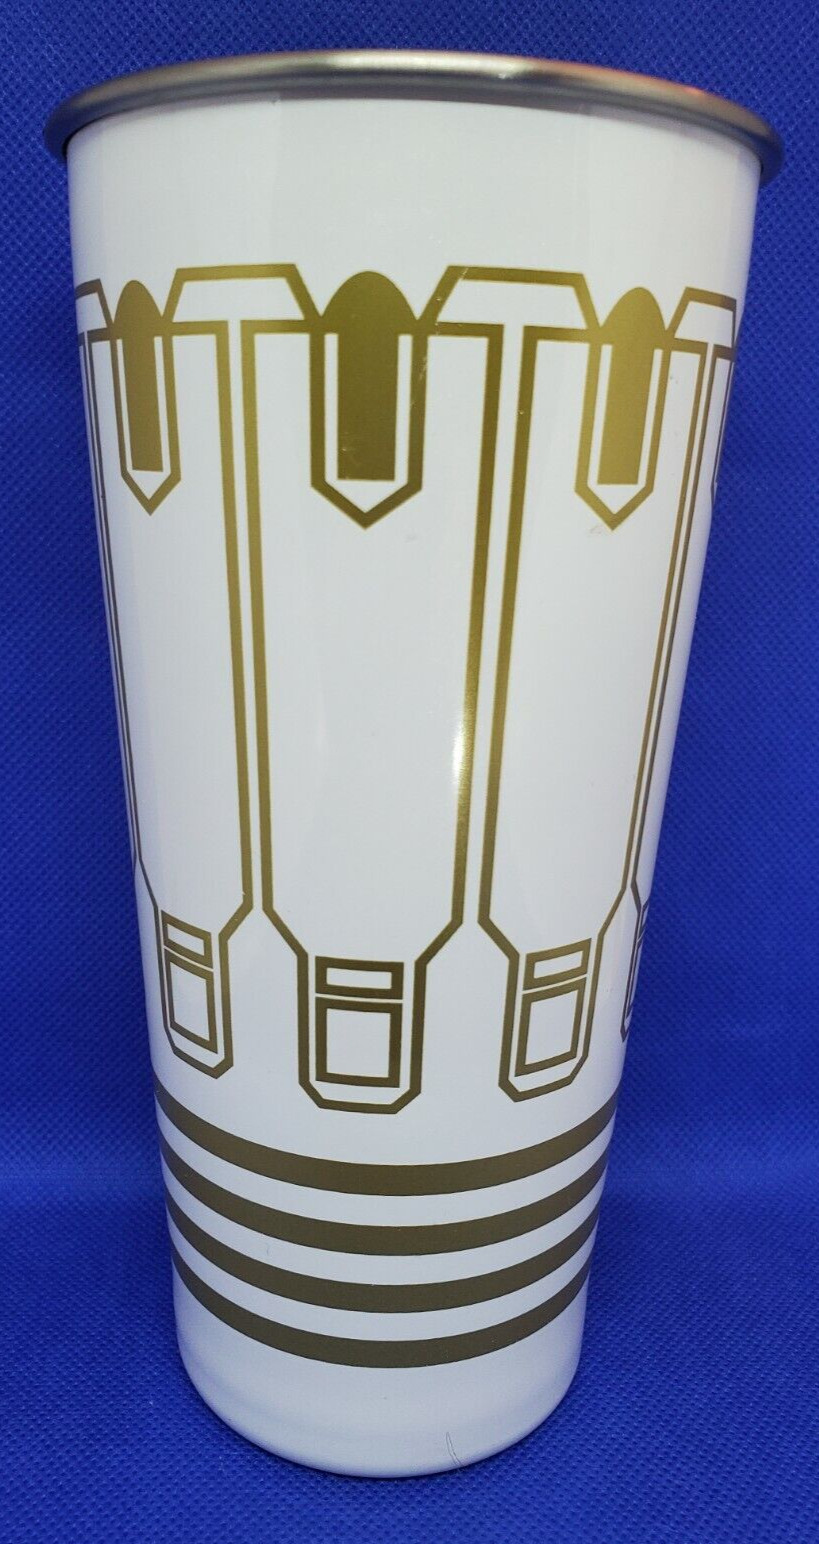 STAR WARS Stainless Tumbler with Lid Se7en20